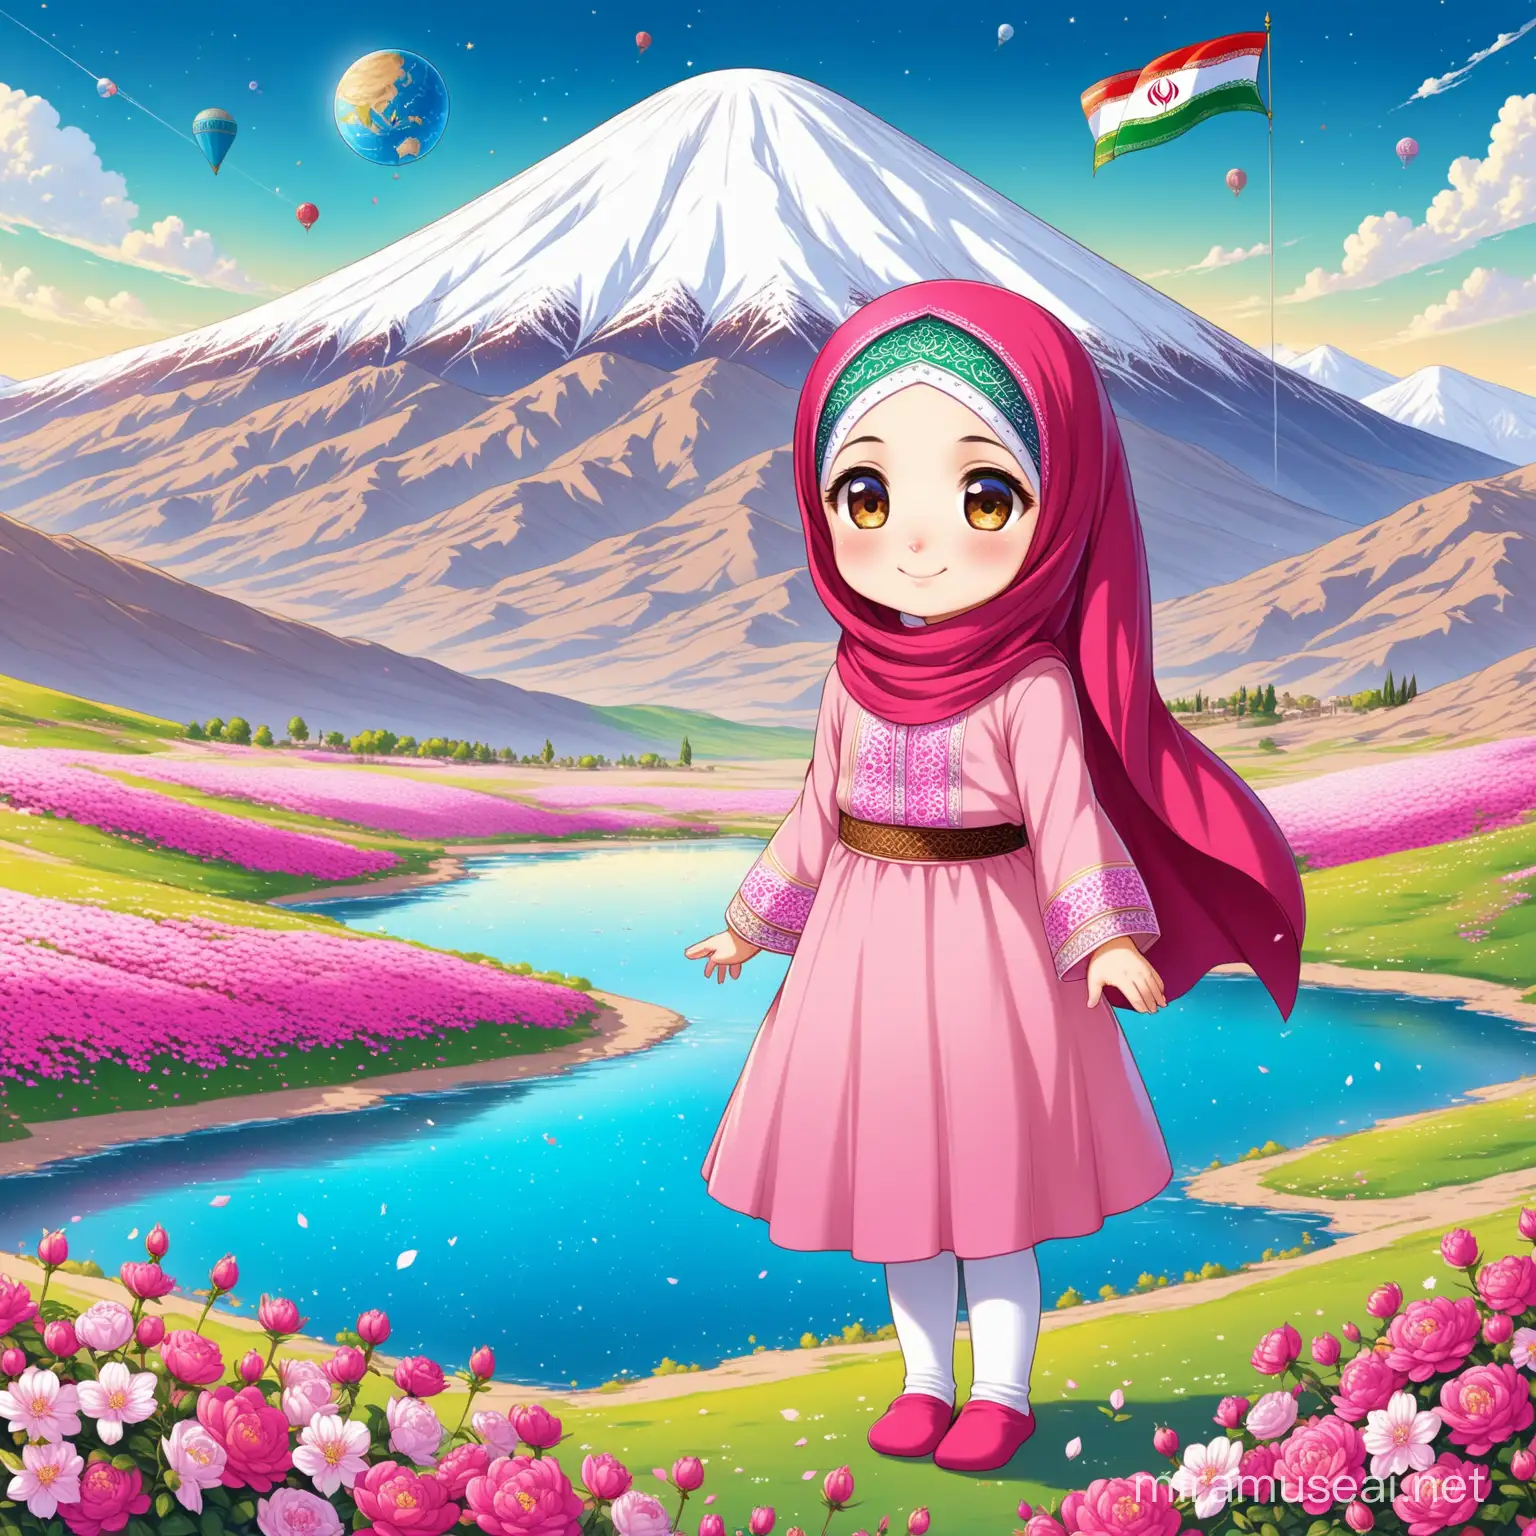 Character Persian little girl(full height, Muslim, with emphasis no hair out of veil(Hijab), small eyes, bigger nose, white skin, cute, smiling, wearing socks, clothes full of Persian designs).

Text containing Shia religious Slogan.

Atmosphere Damavand mountain, nice flag of Iran proudly raised, firing satellite to sky and full of many pink flowers, lake, sparing.